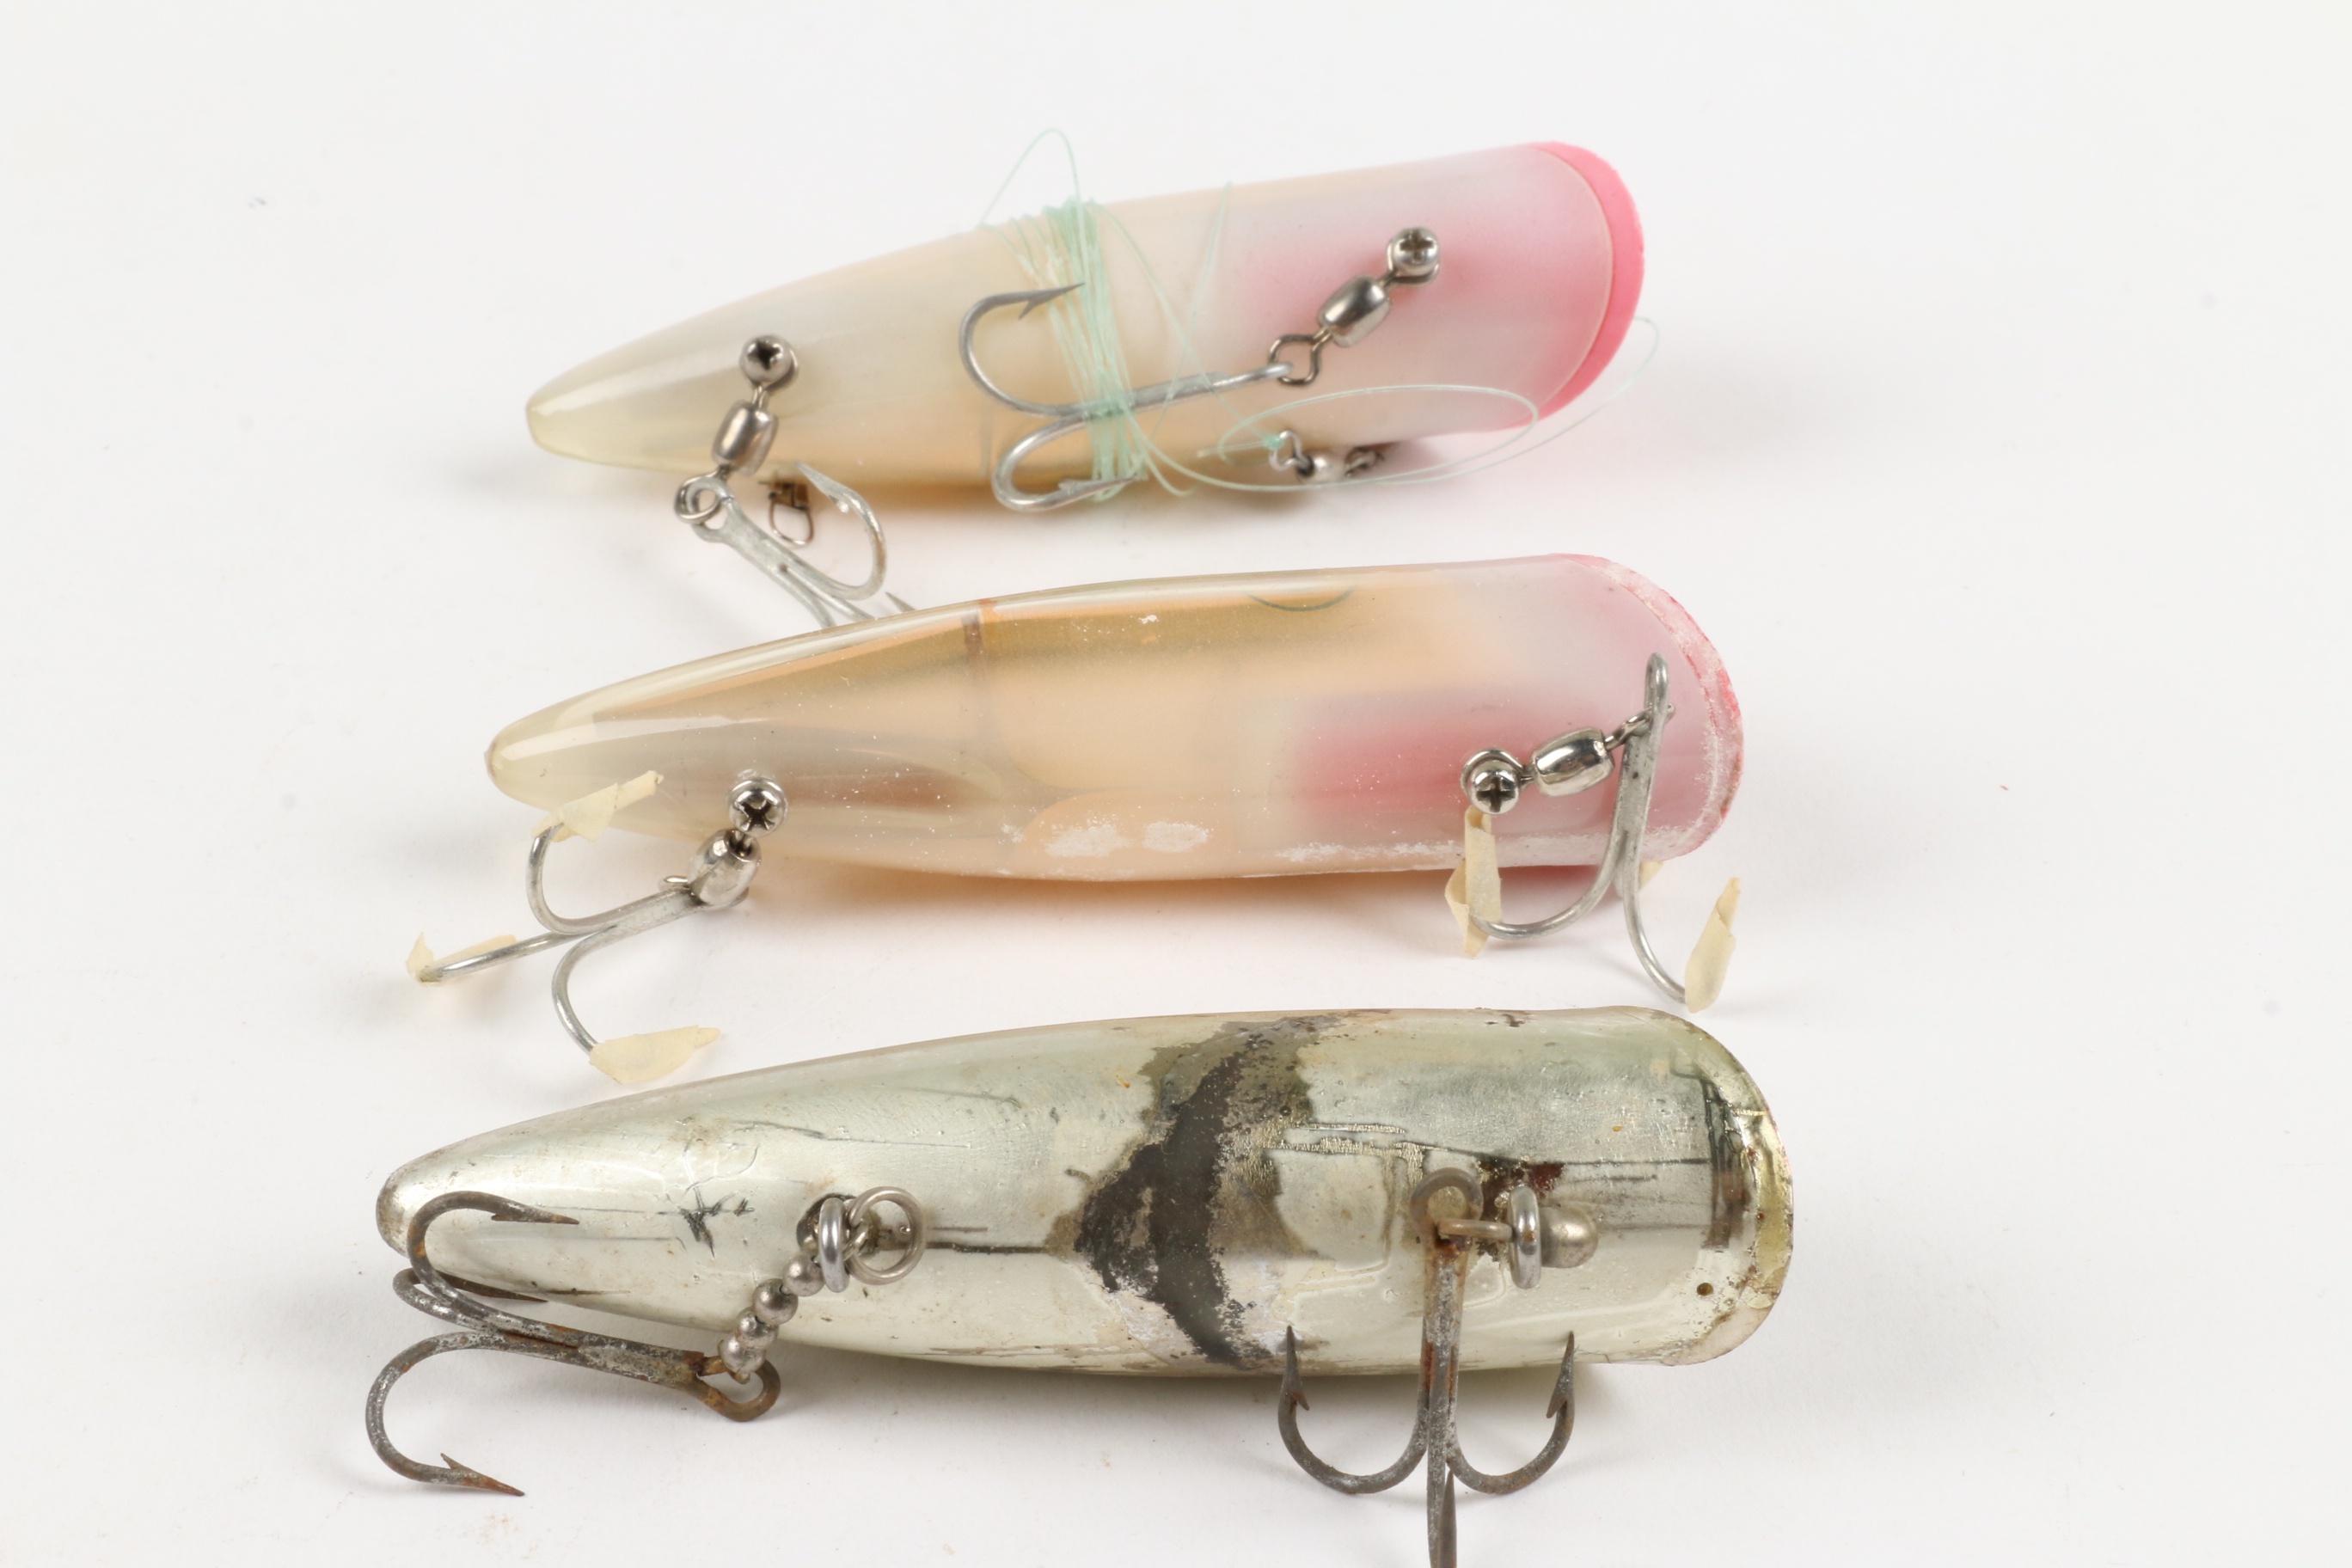 651) VNTG. Grizzly Mack's Squid 4 3/8 salmon plug fishing lure/Curved  front $19.99 - PicClick